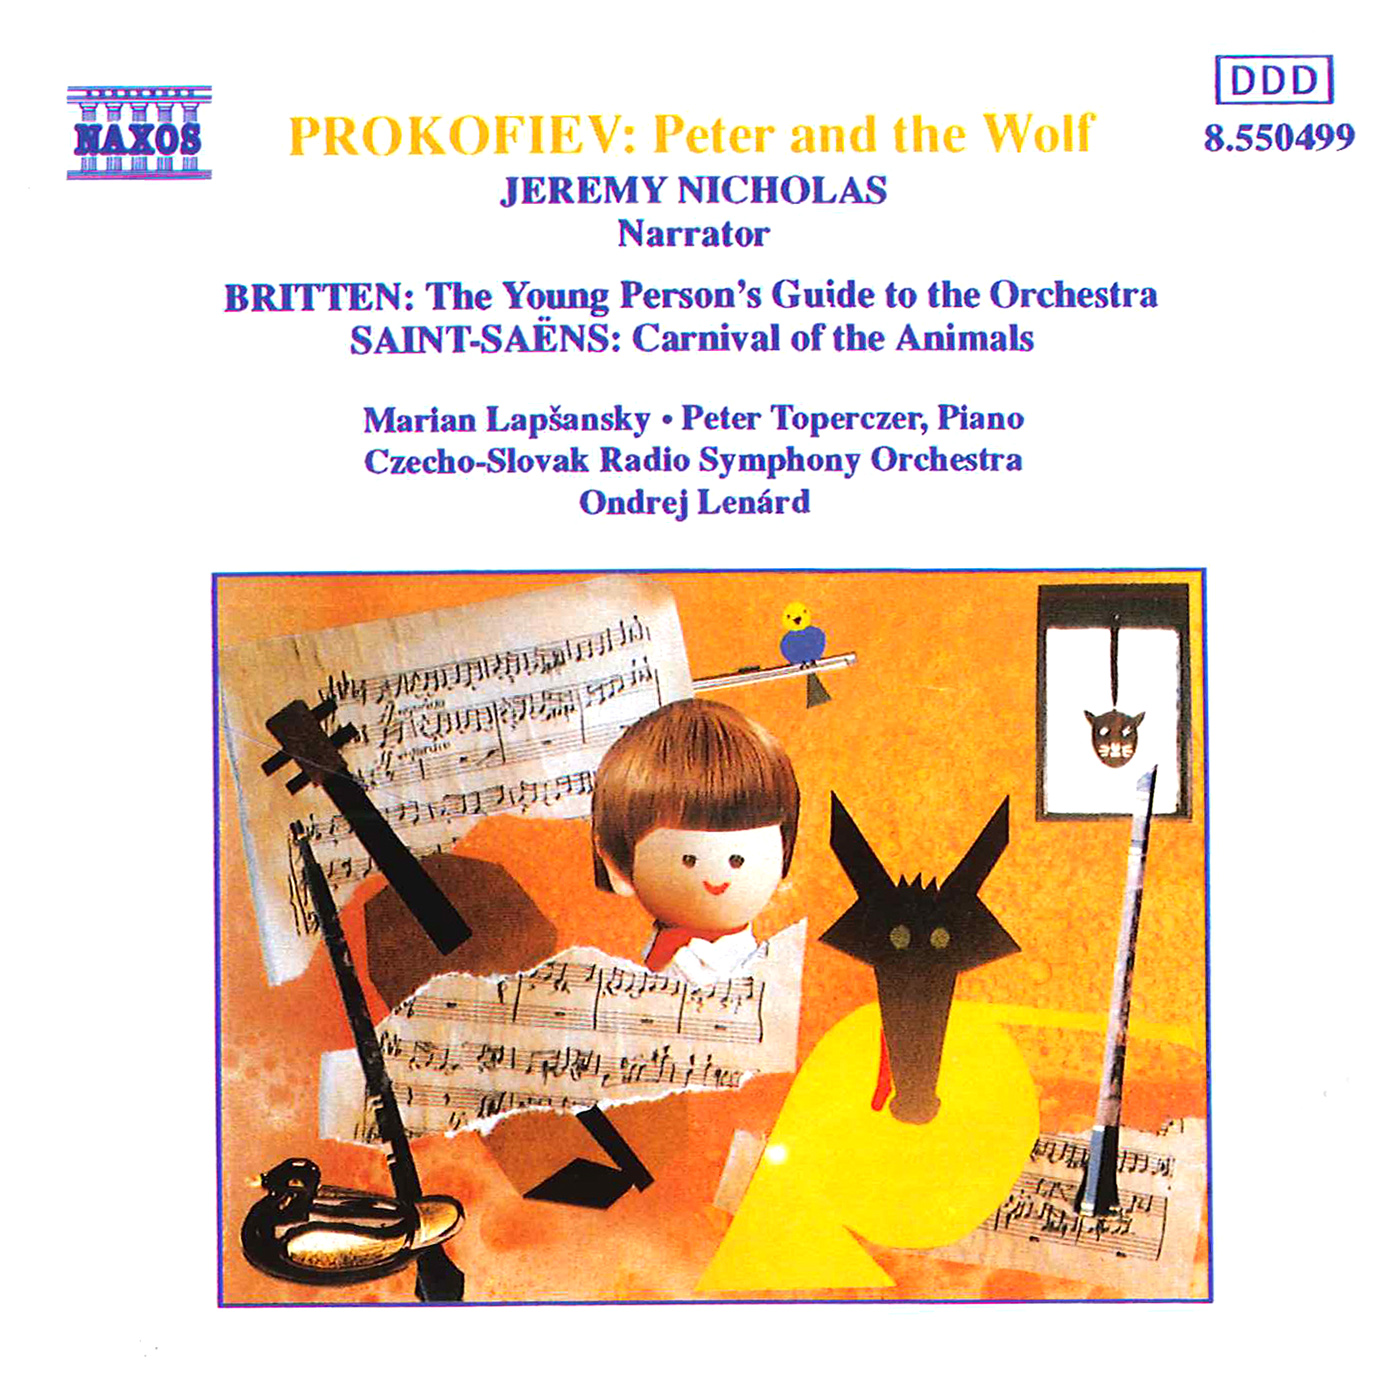 The Young Person's Guide to the Orchestra: Variations and Fugue on a Theme of Henry Purcell, Op. 34: I. Theme